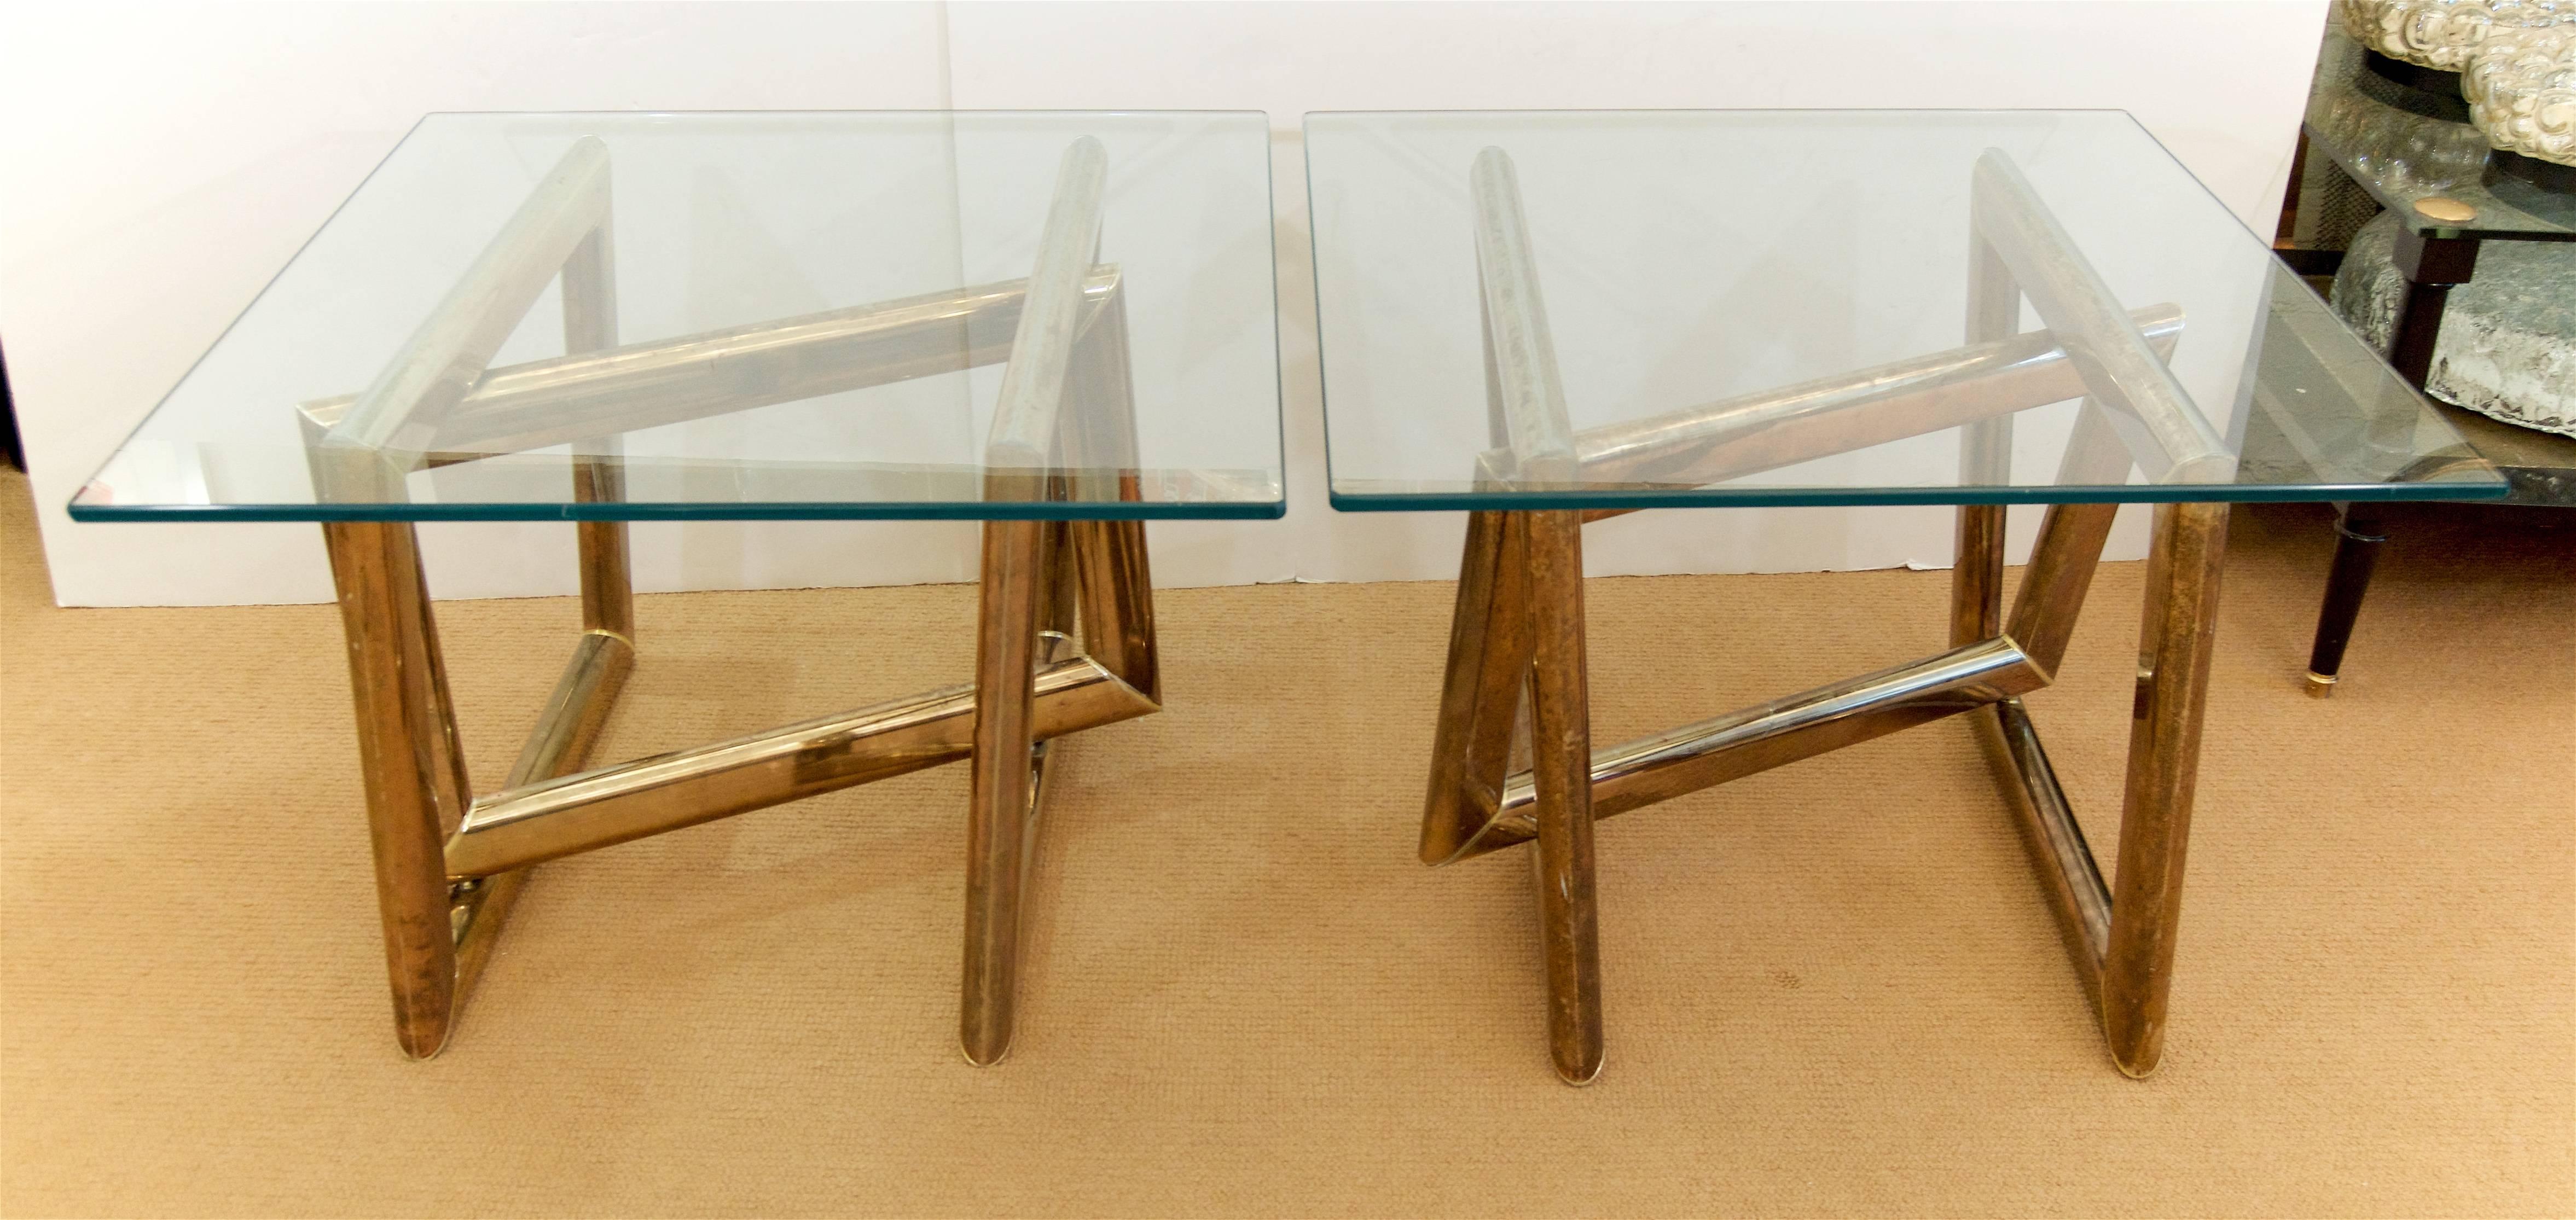 European Pair of Brass Sculptural Side Tables with Glass Tops For Sale